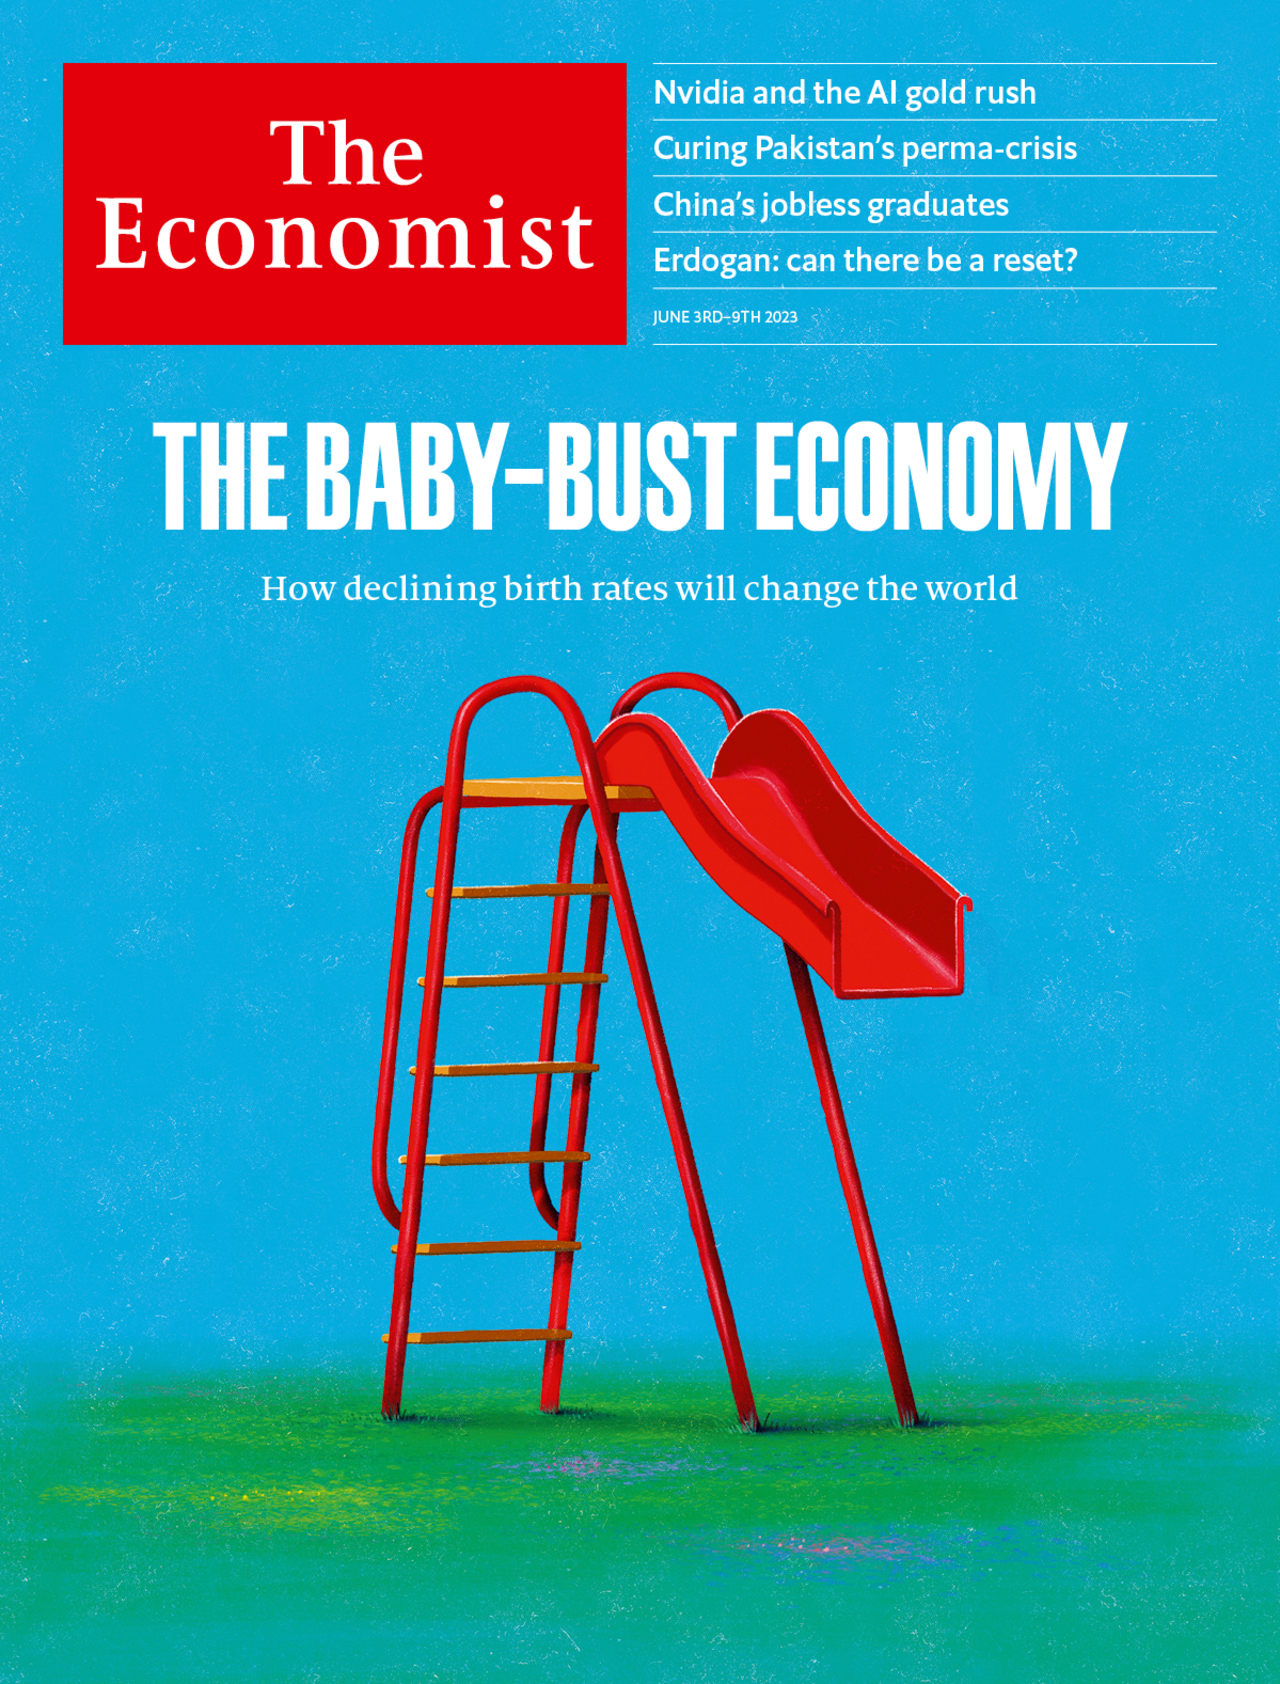 The baby-bust economy: How declining birth rates will change the world